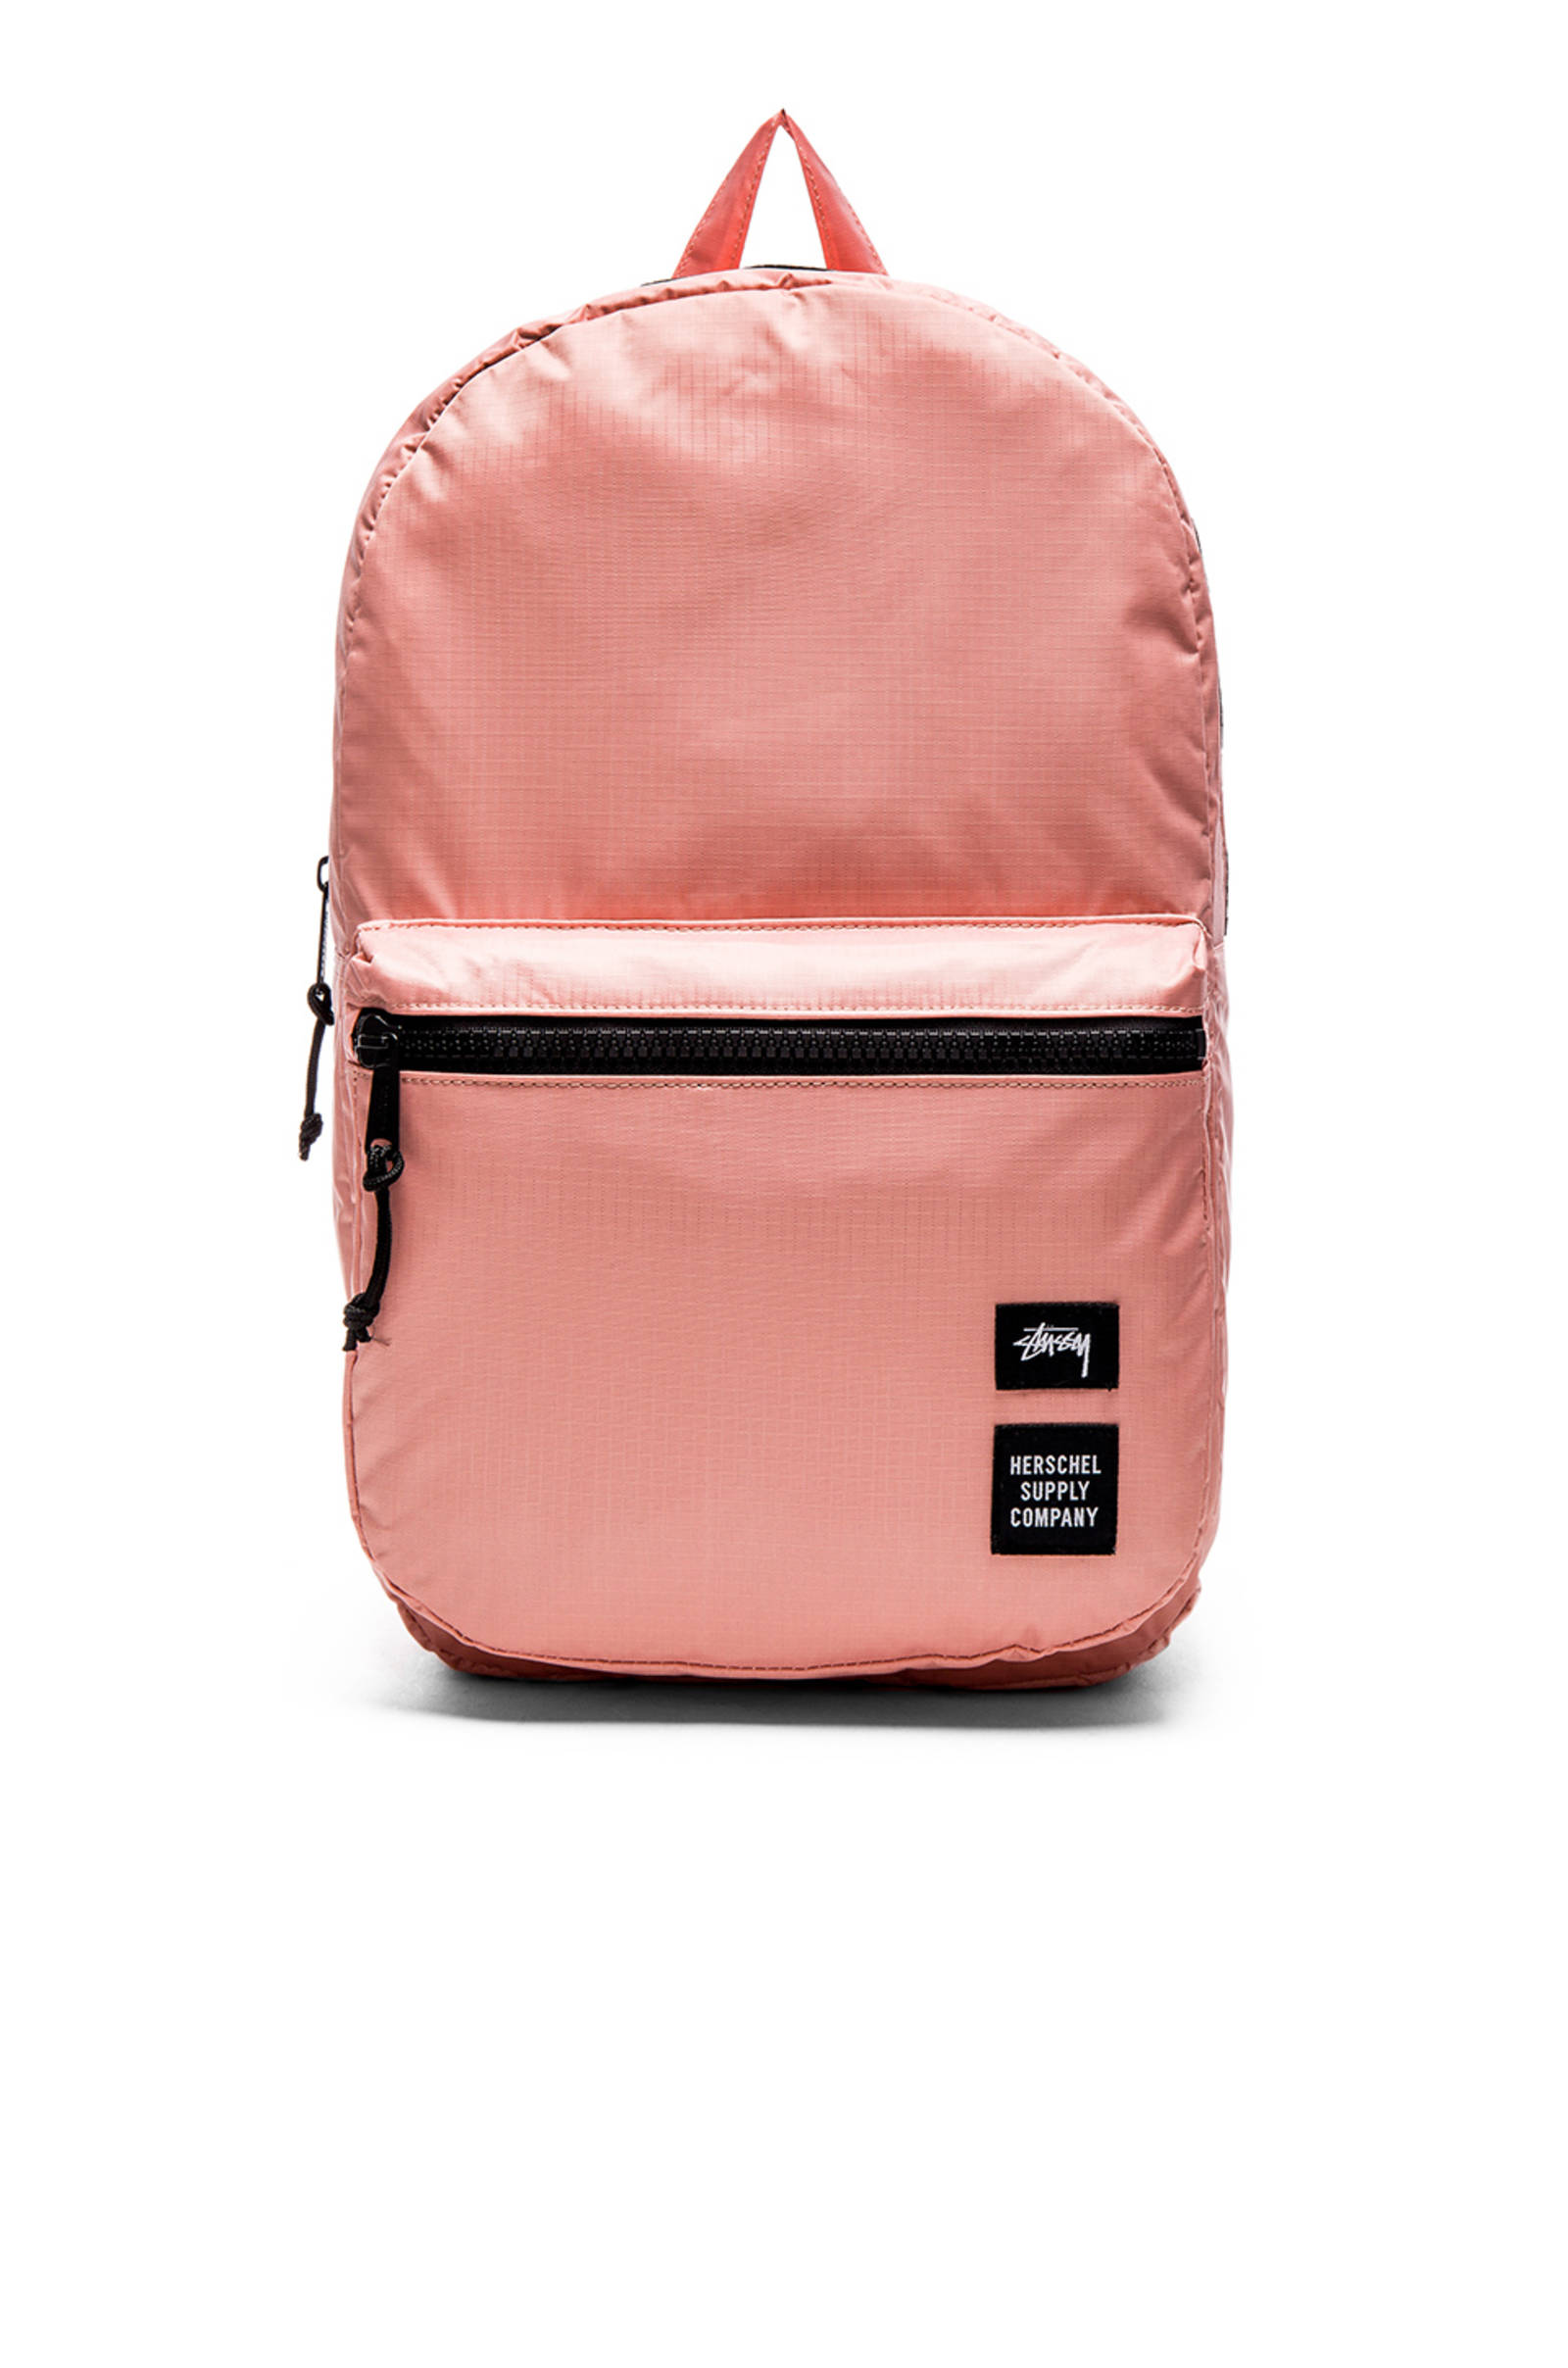 8 Cute Backpacks That Will Actually Fit Your Laptop - Galore